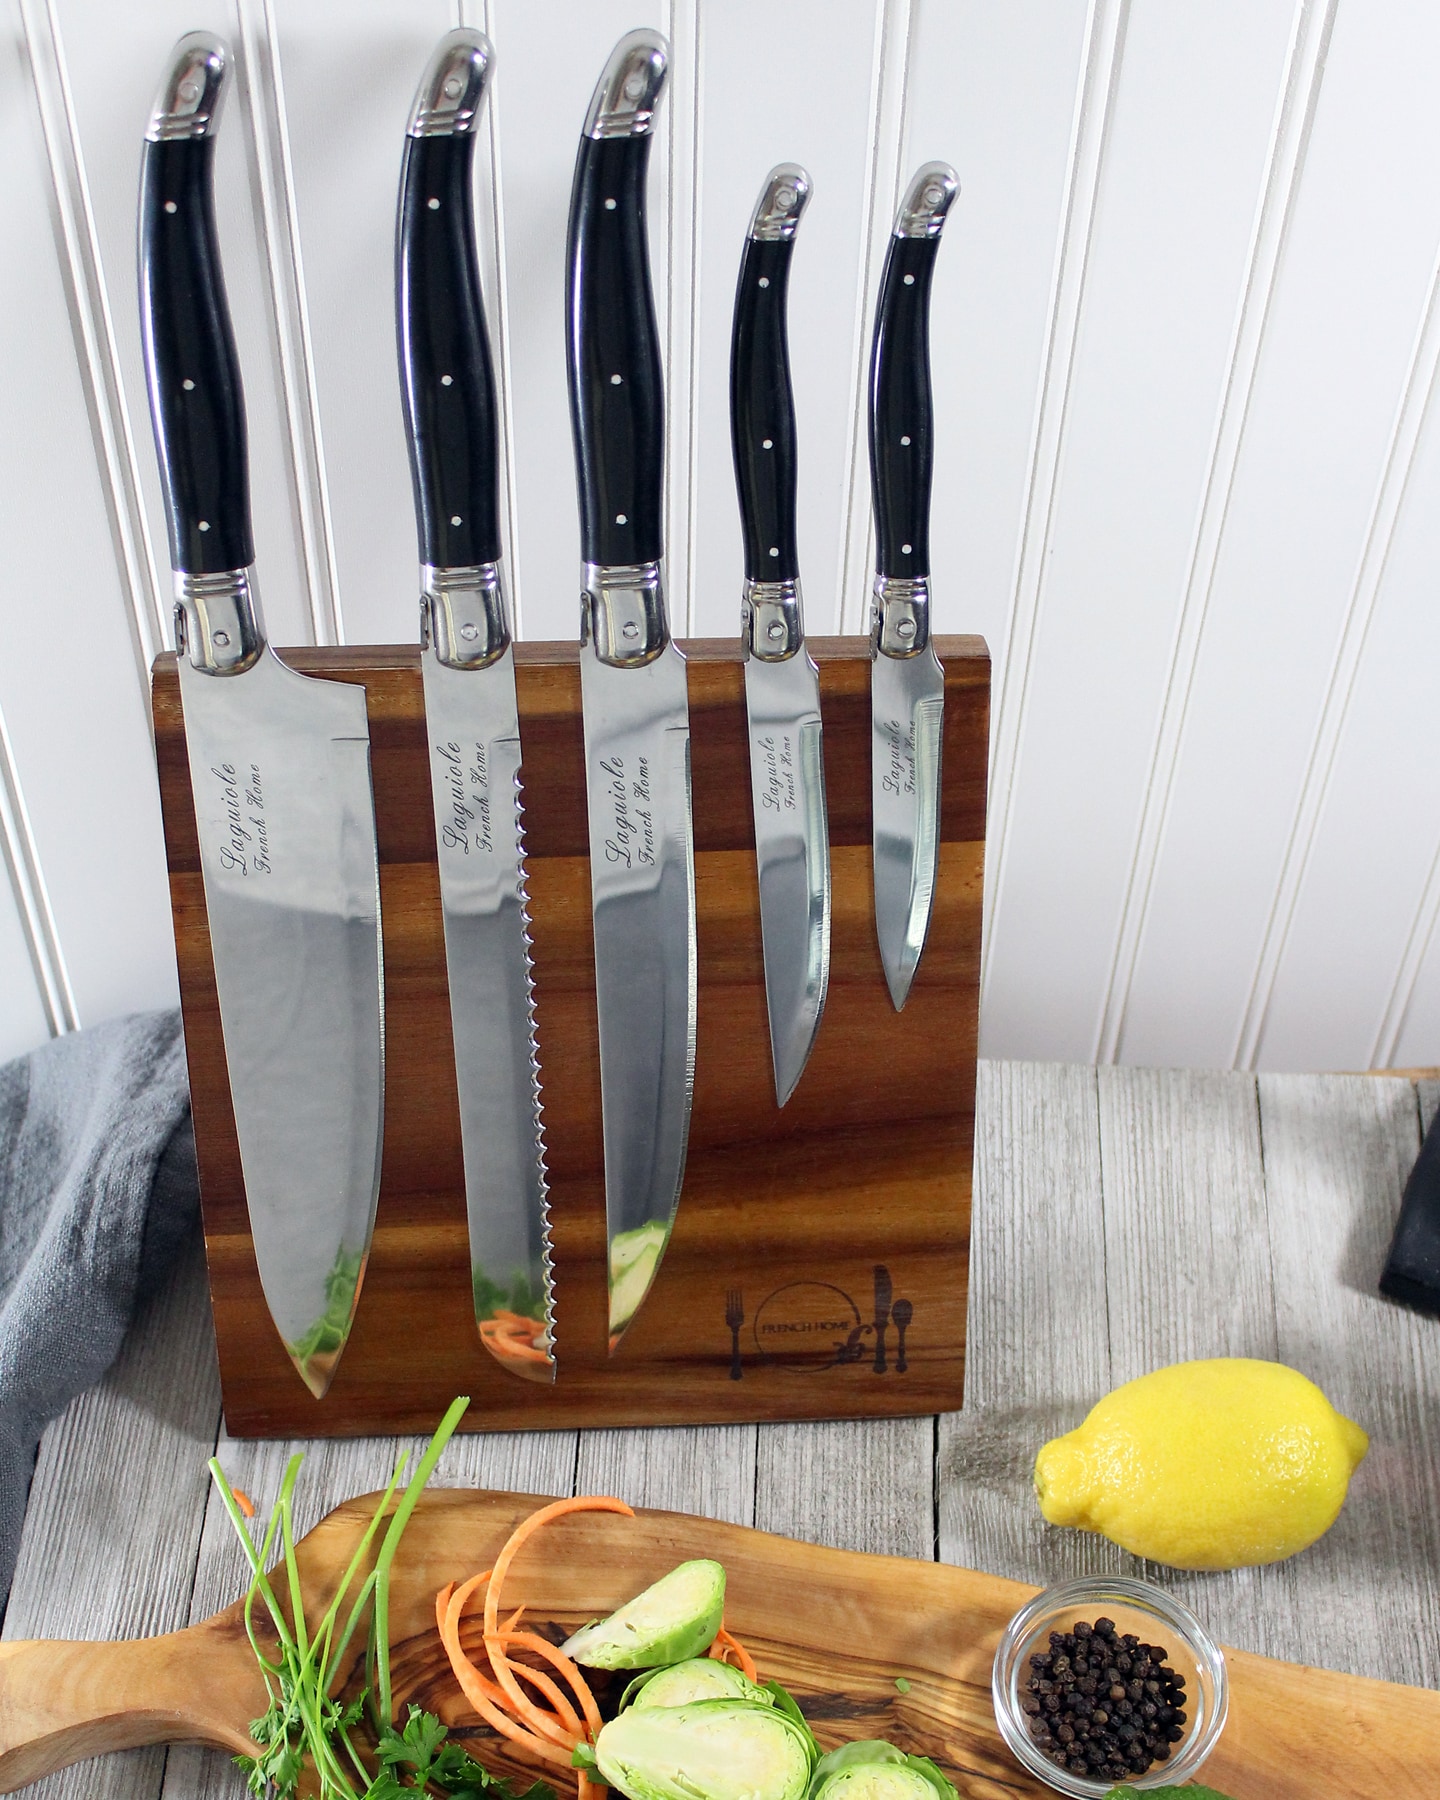 French Home 7 Piece Connoisseur Laguiole Black Pakkawood Kitchen Knife Set with Knife Sharpener